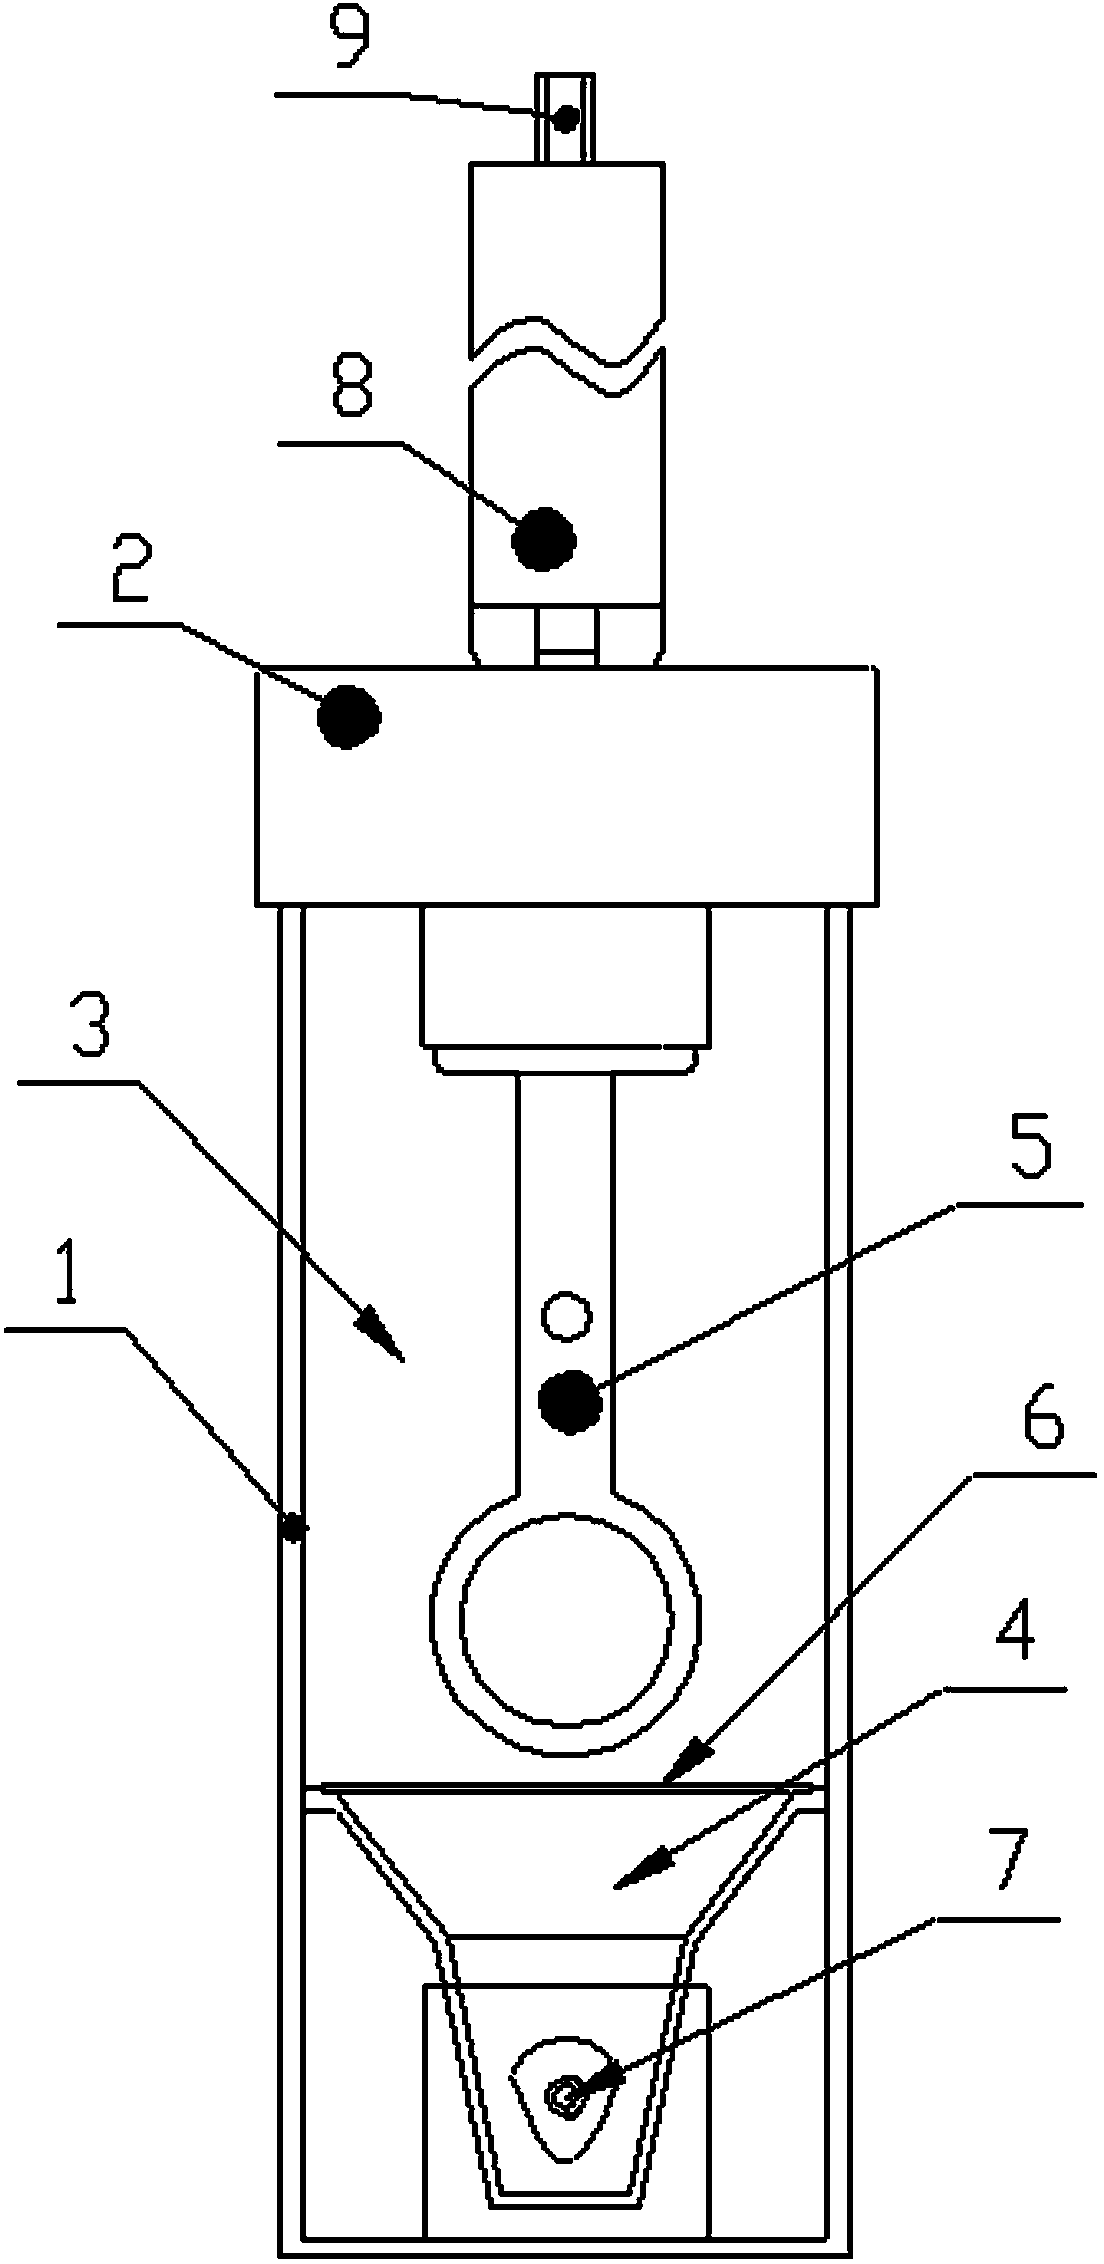 Body fluid detection preprocessing device